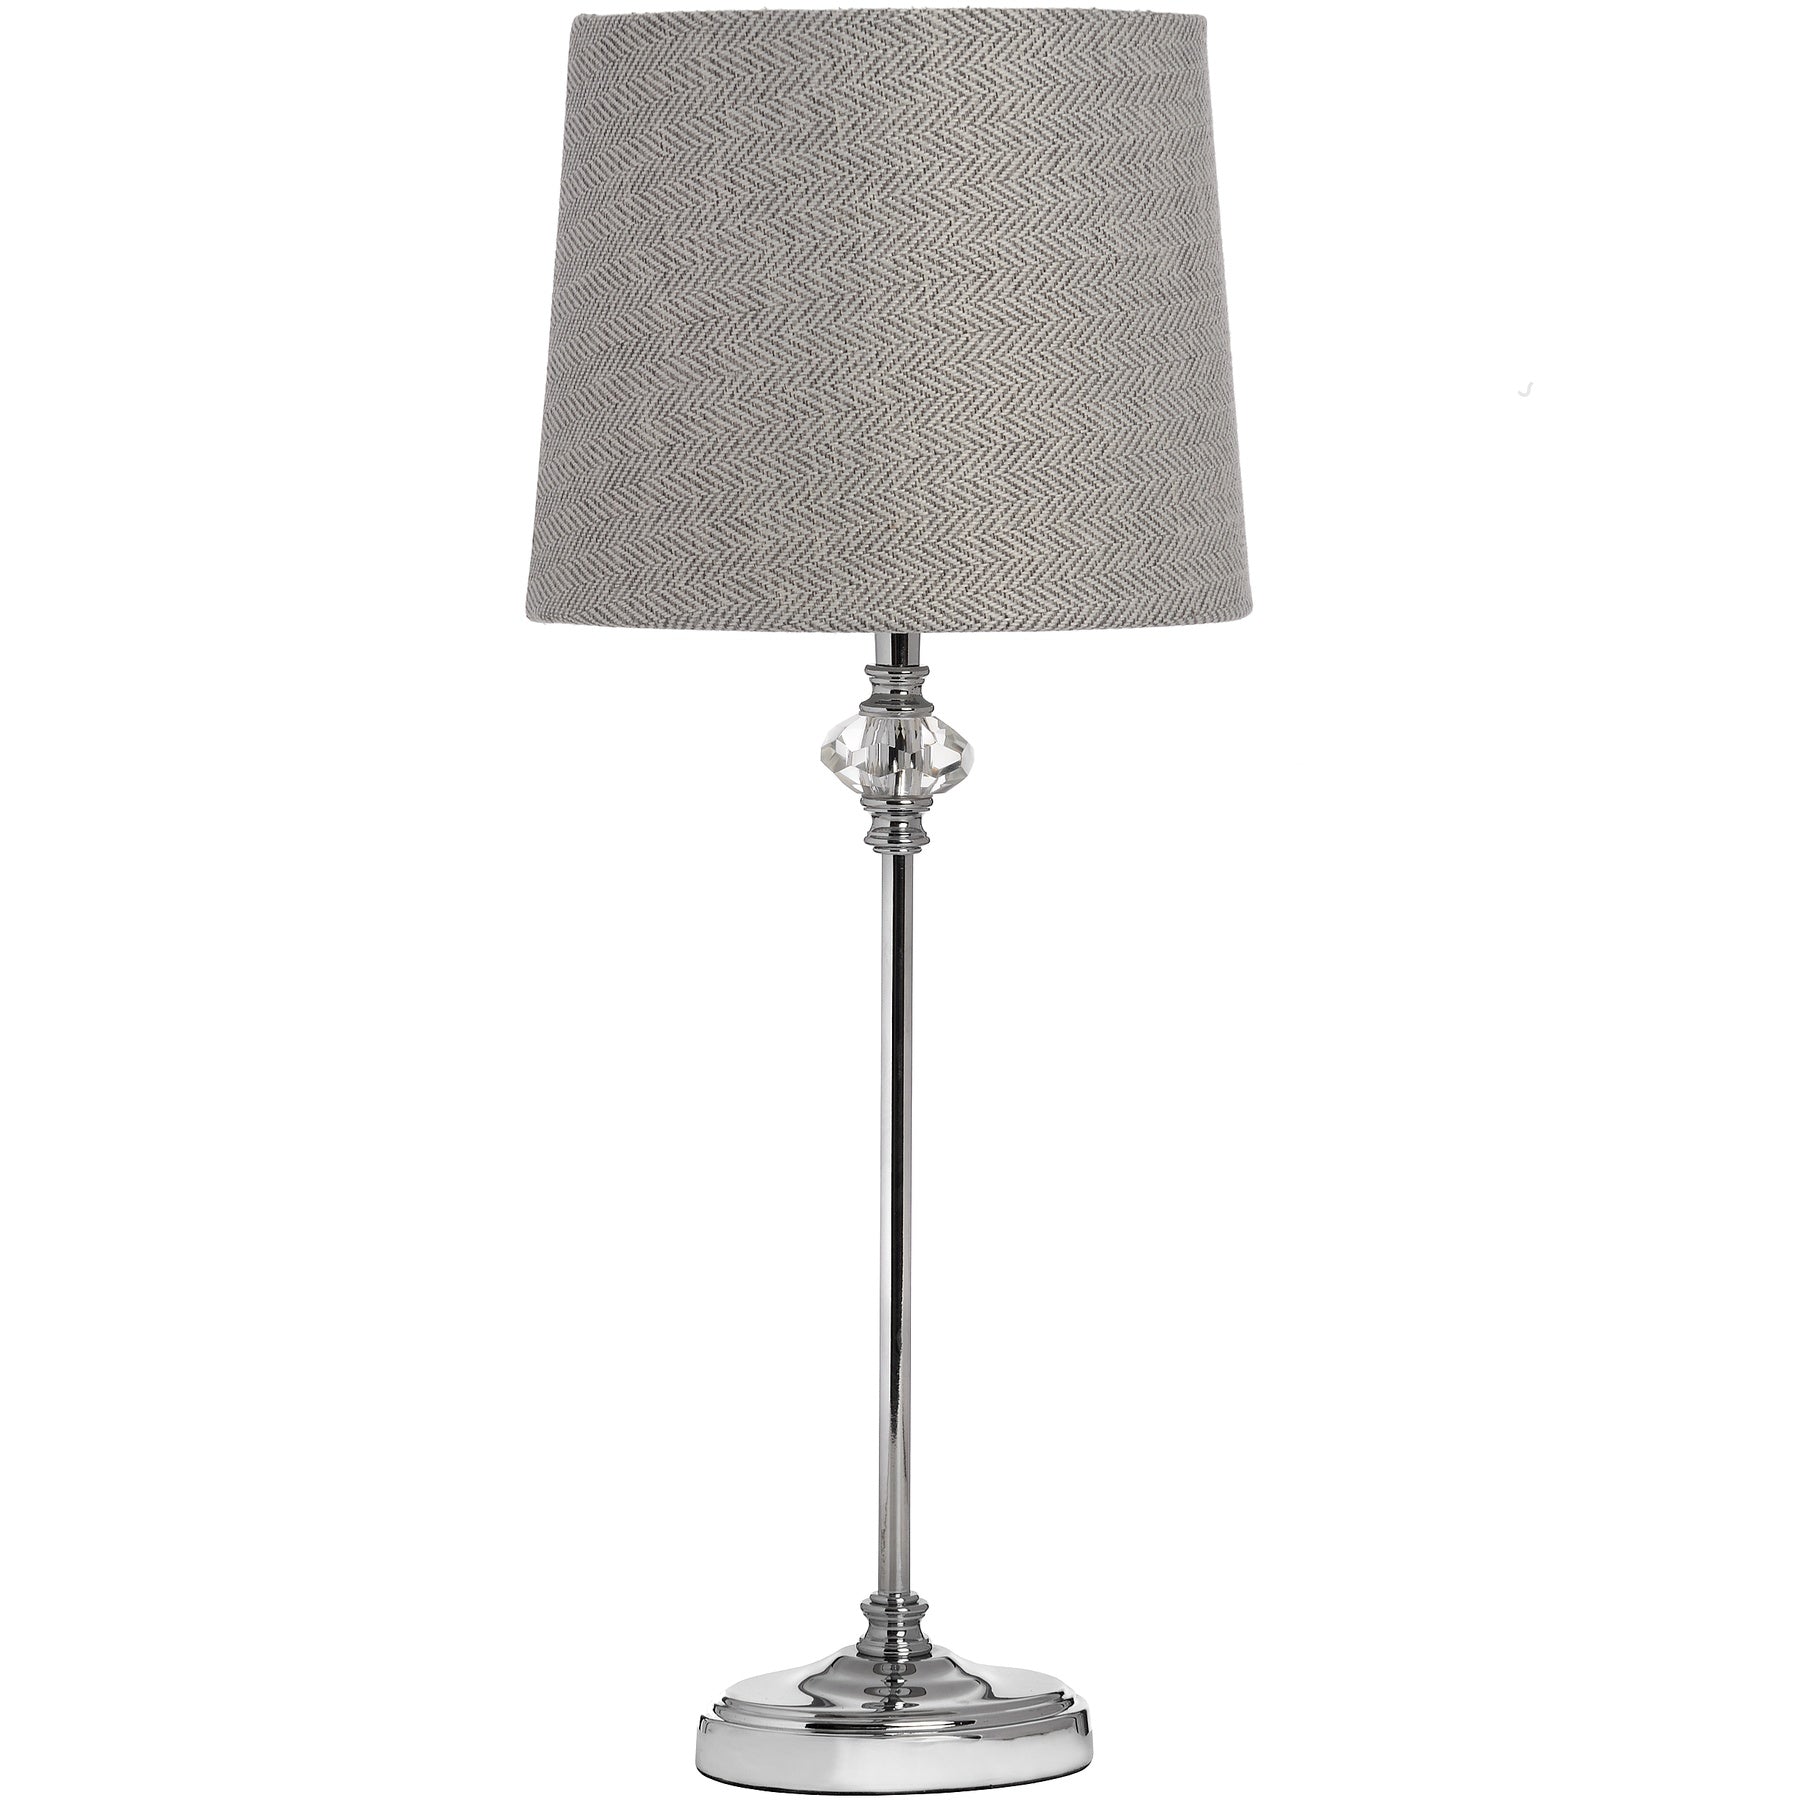 The Firenze Table Lamp